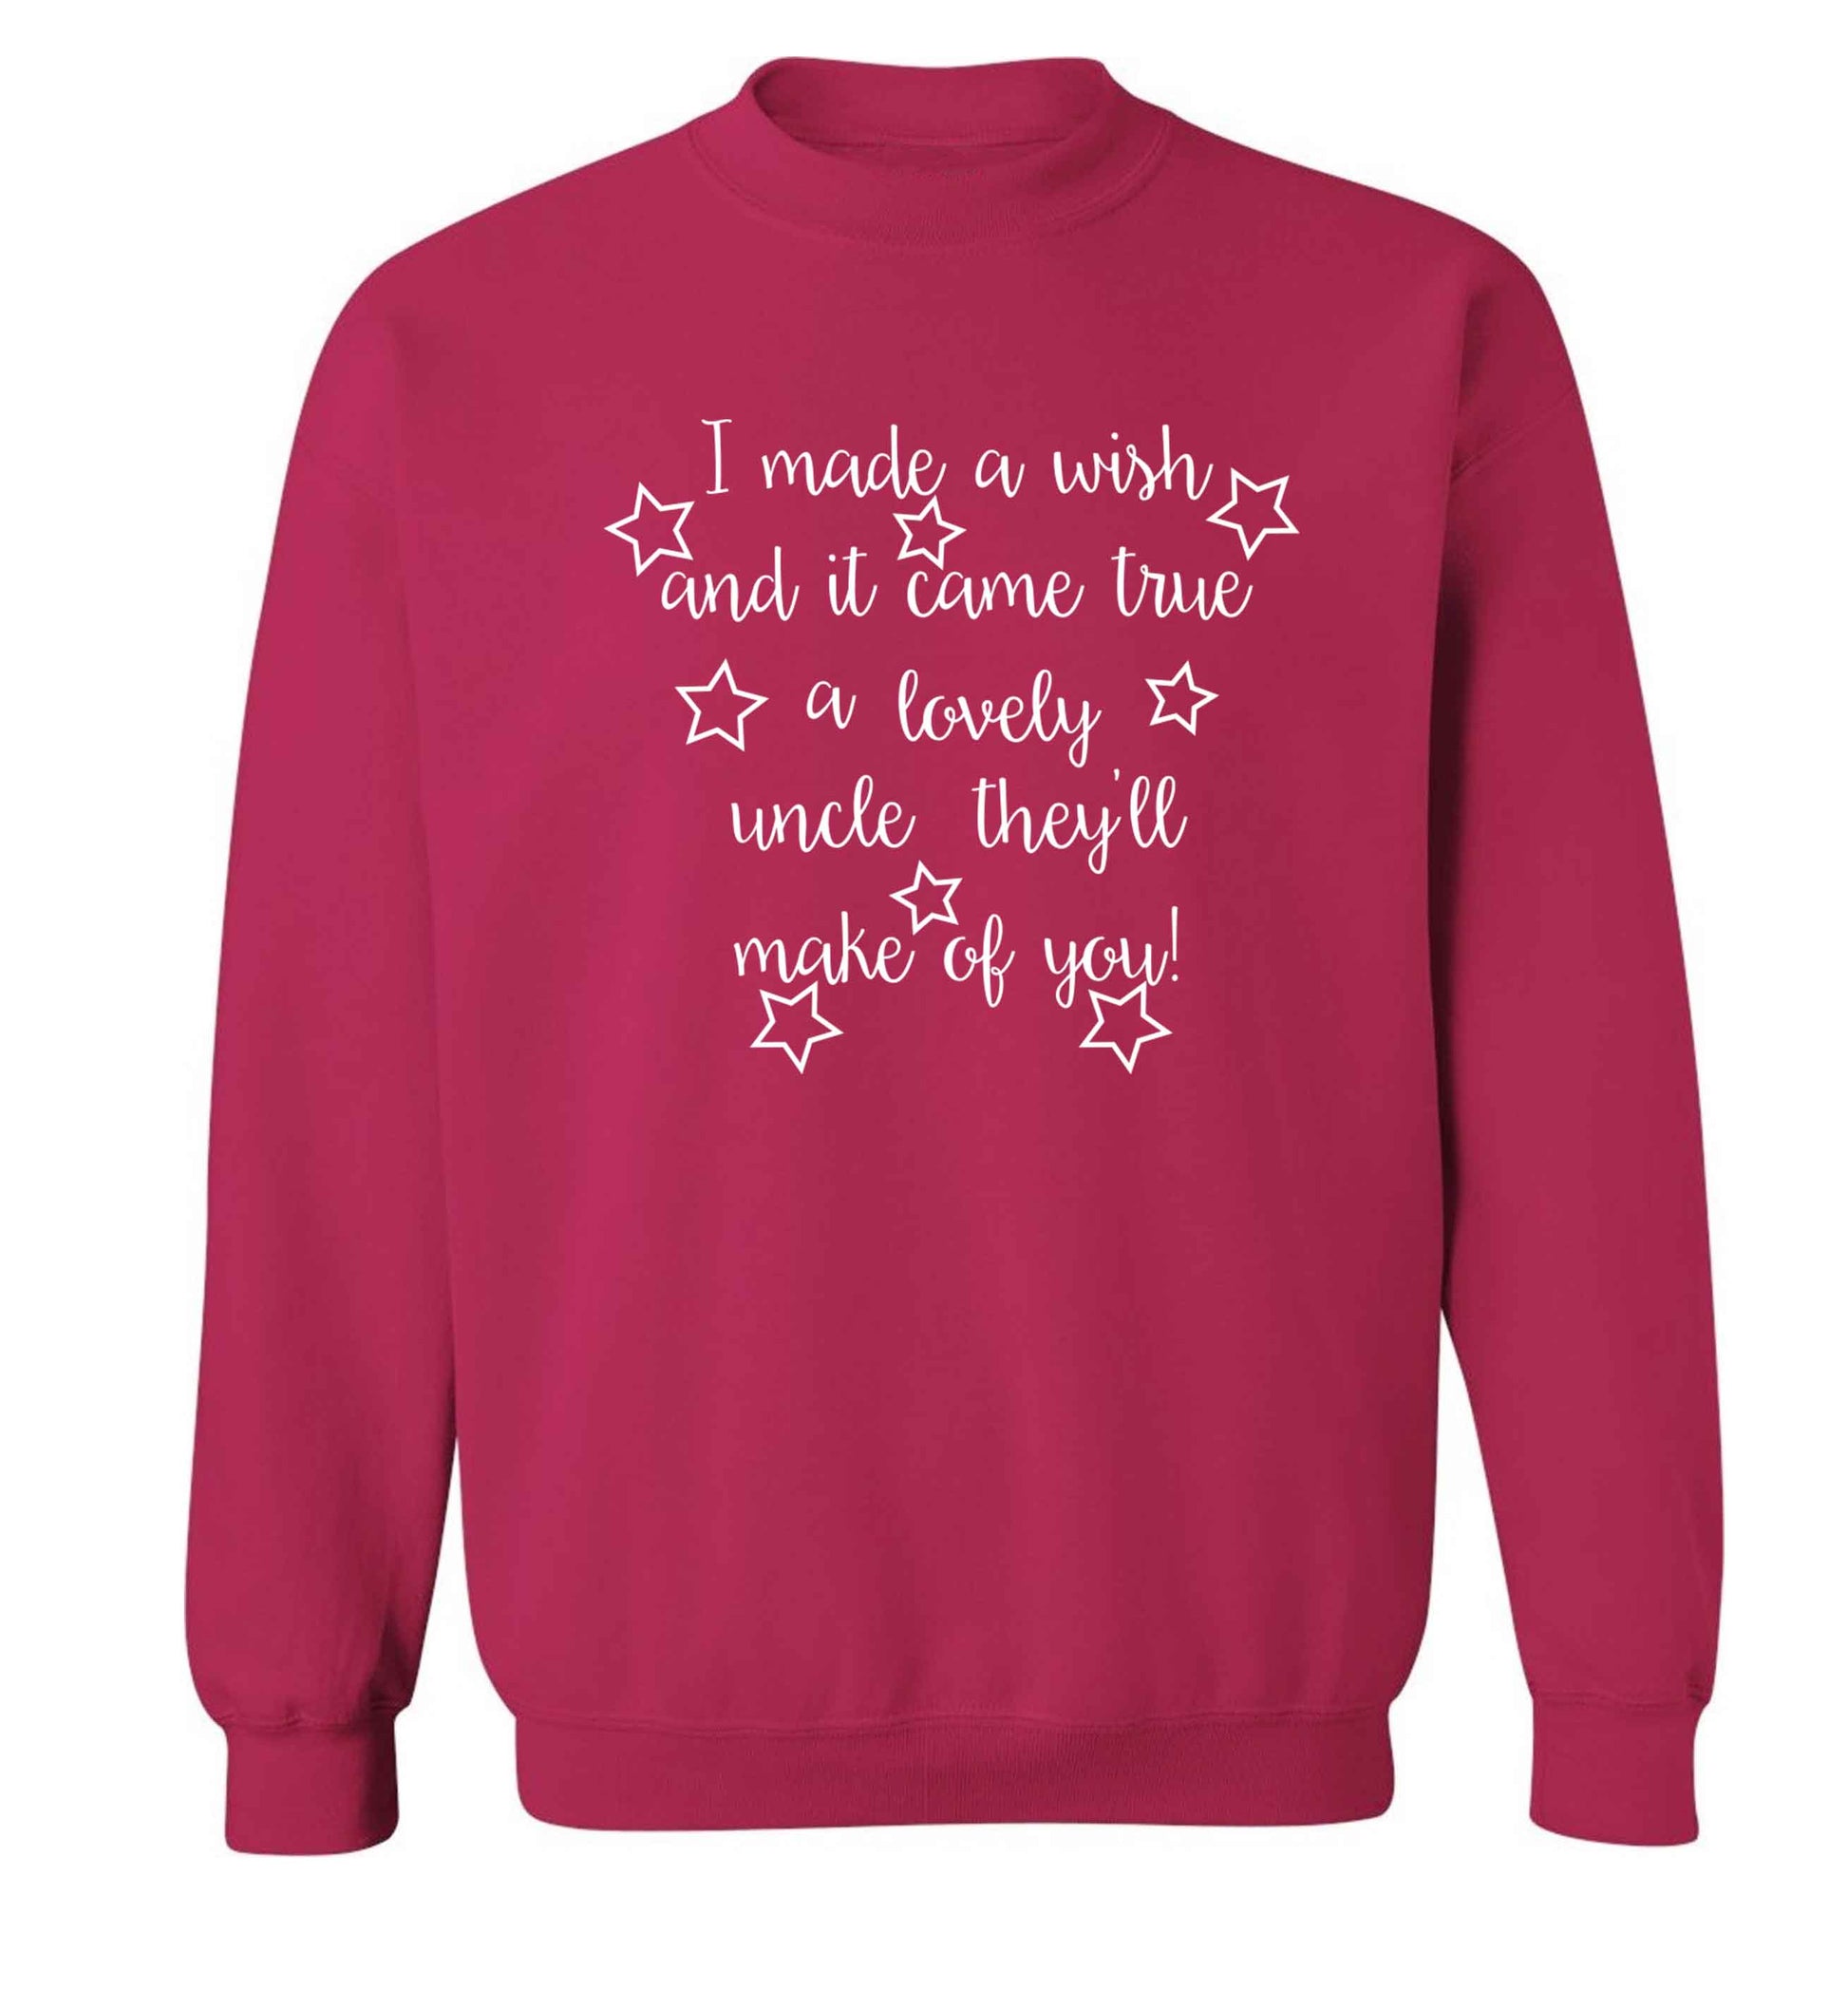 I made a wish and it came true a lovely uncle they'll make of you! Adult's unisex pink Sweater 2XL